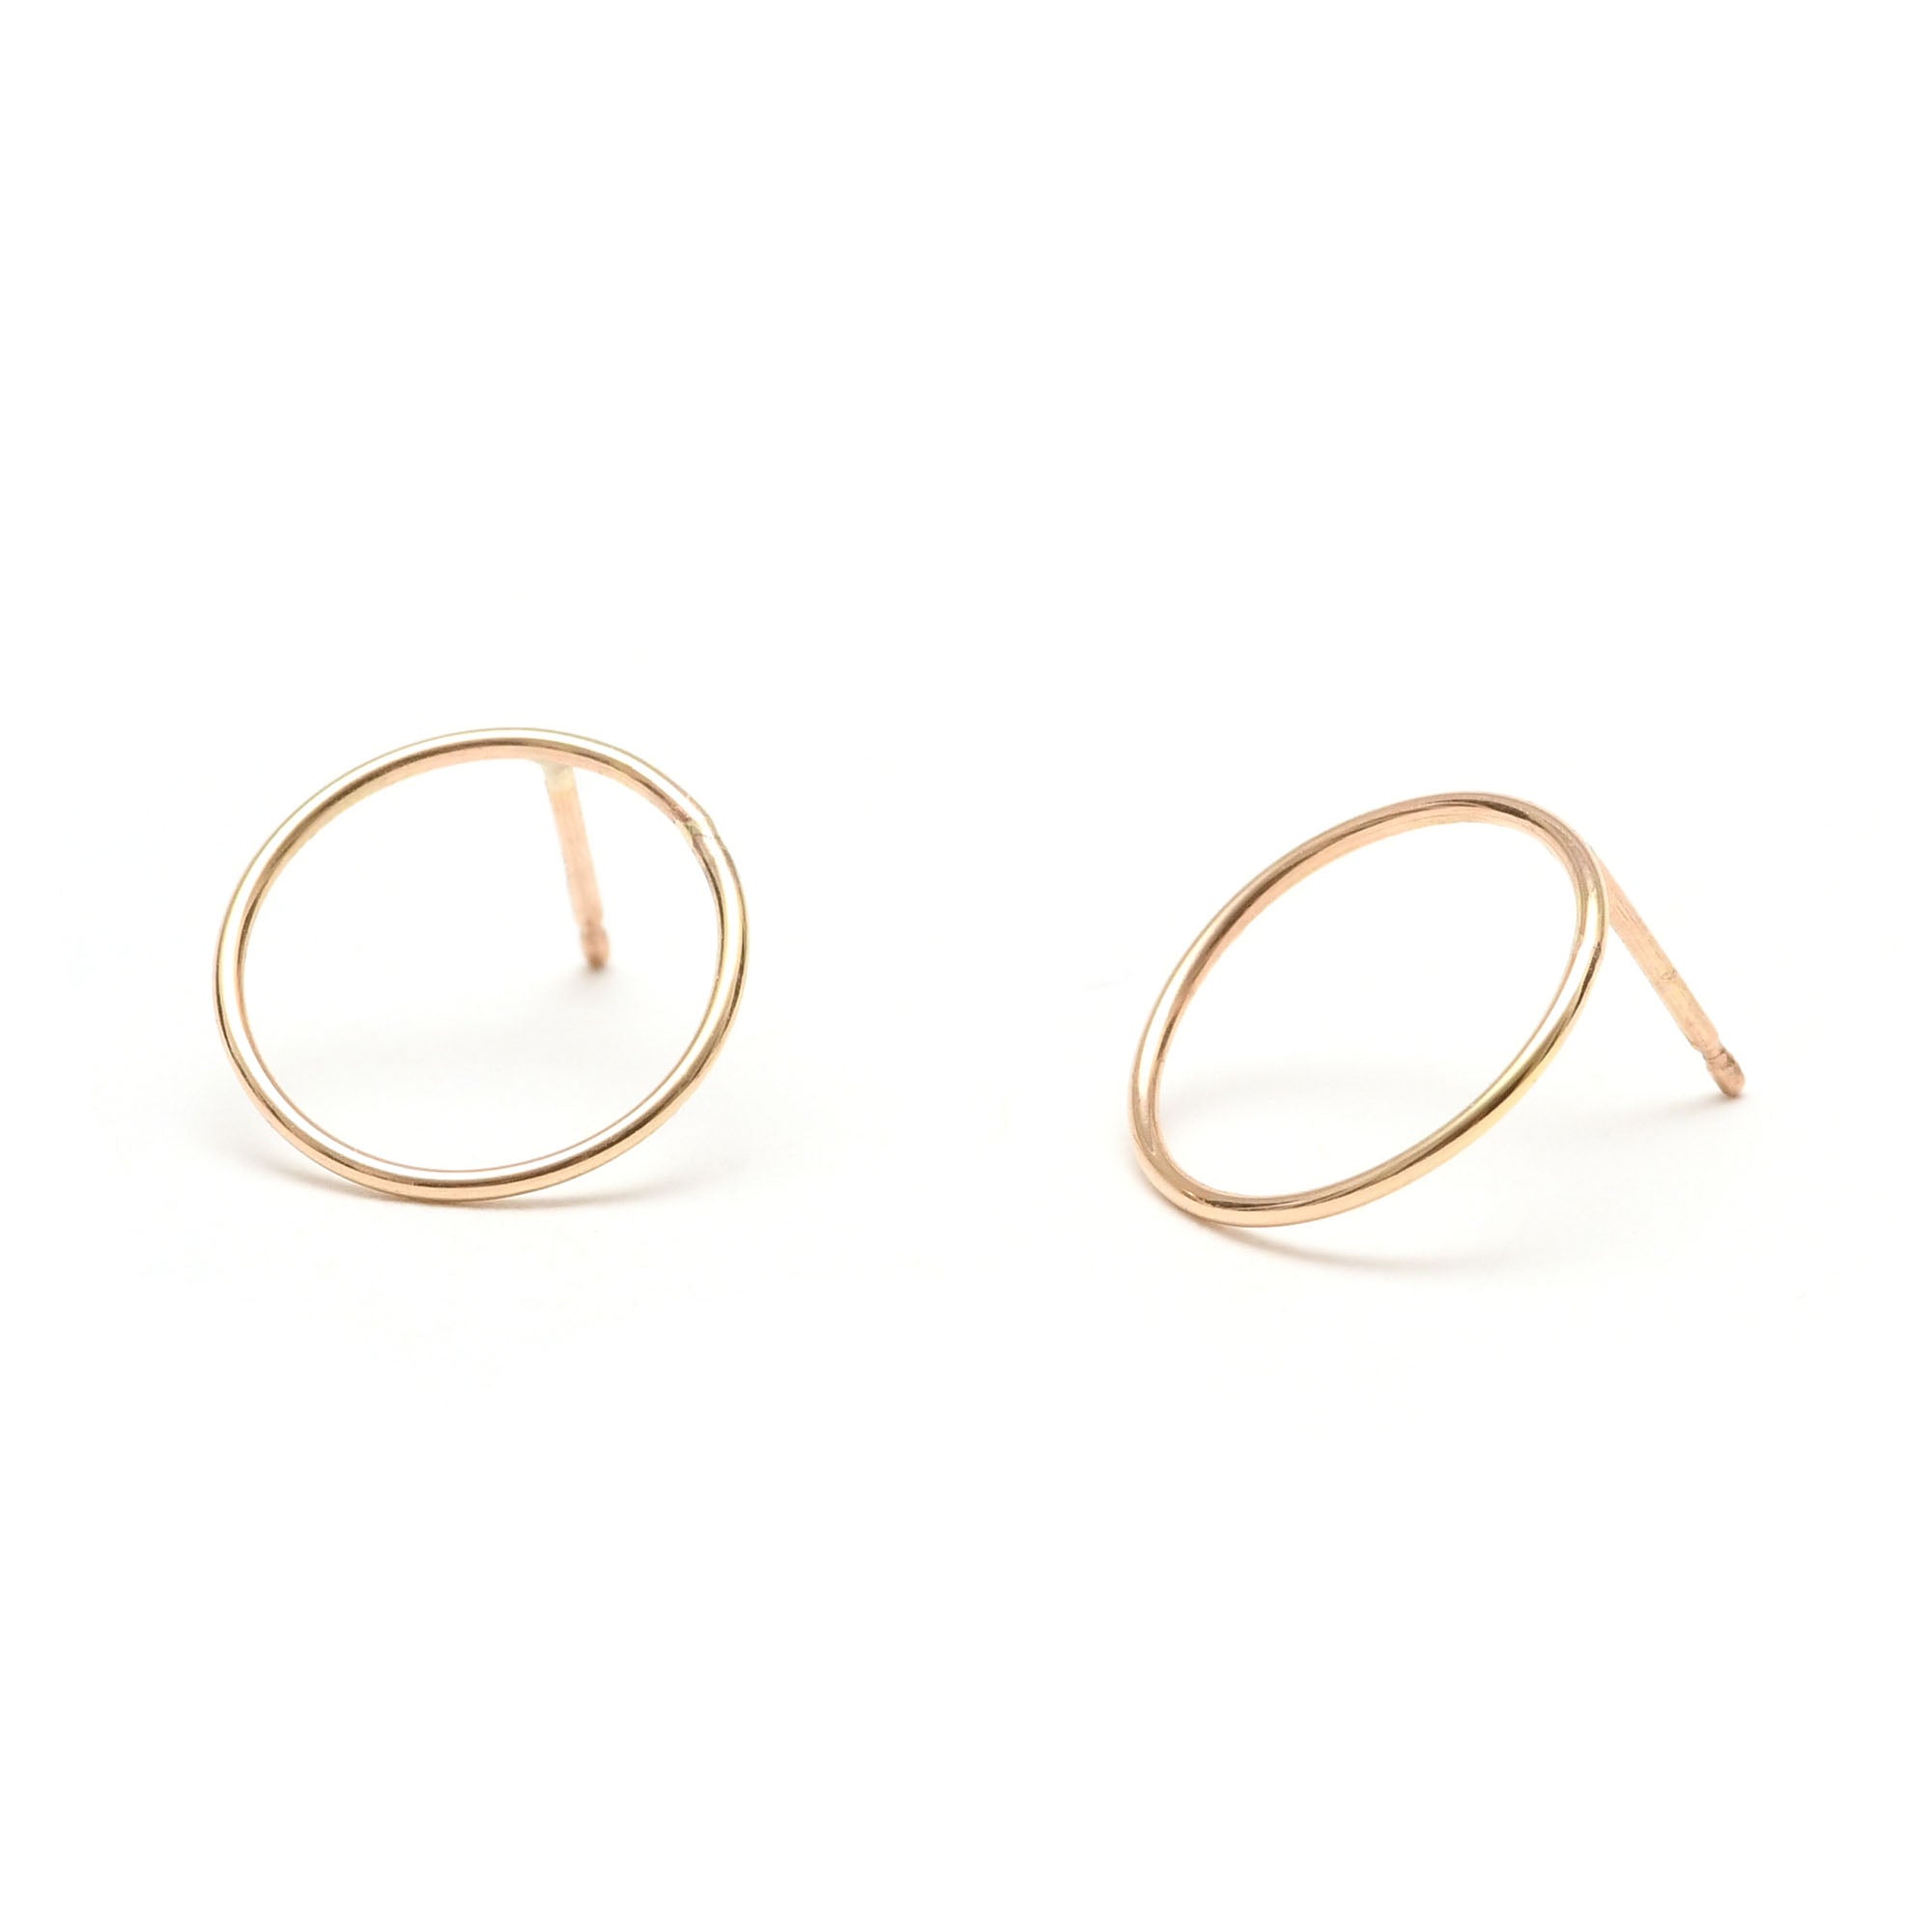 Larger Trace Open Circle Post Earrings - Favor Jewelry